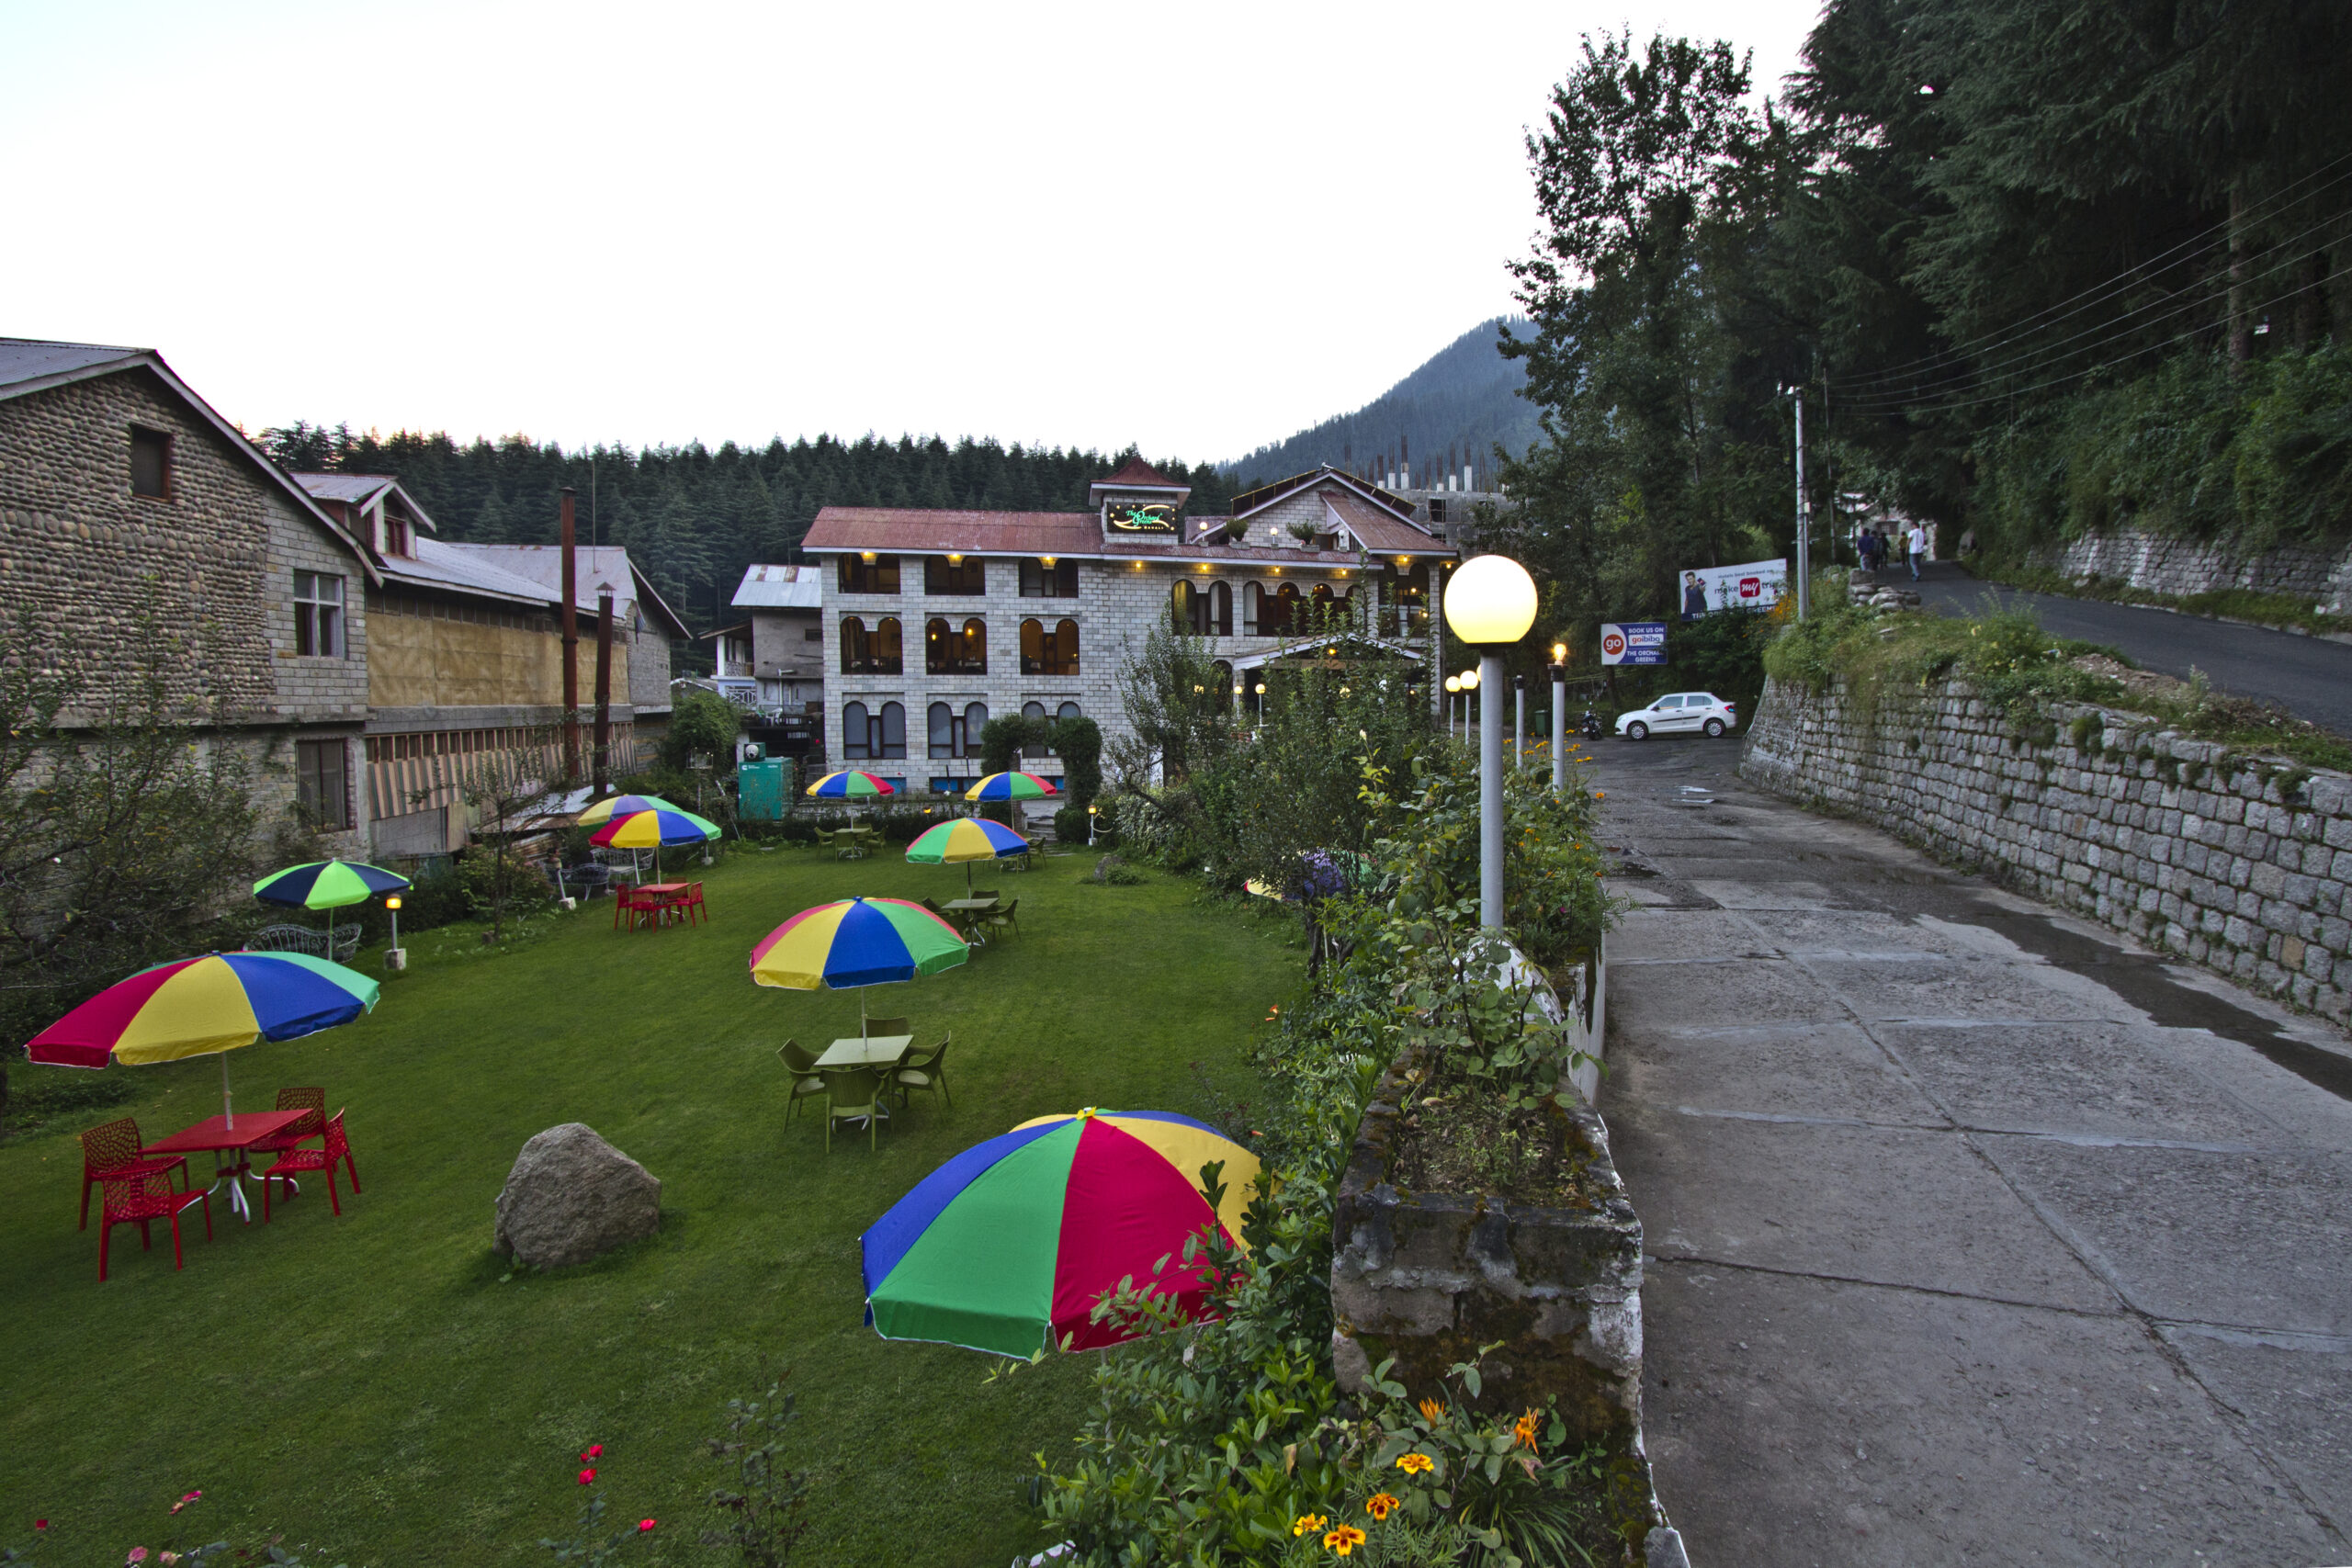 10 Tips about Selecting a Hotel in Manali